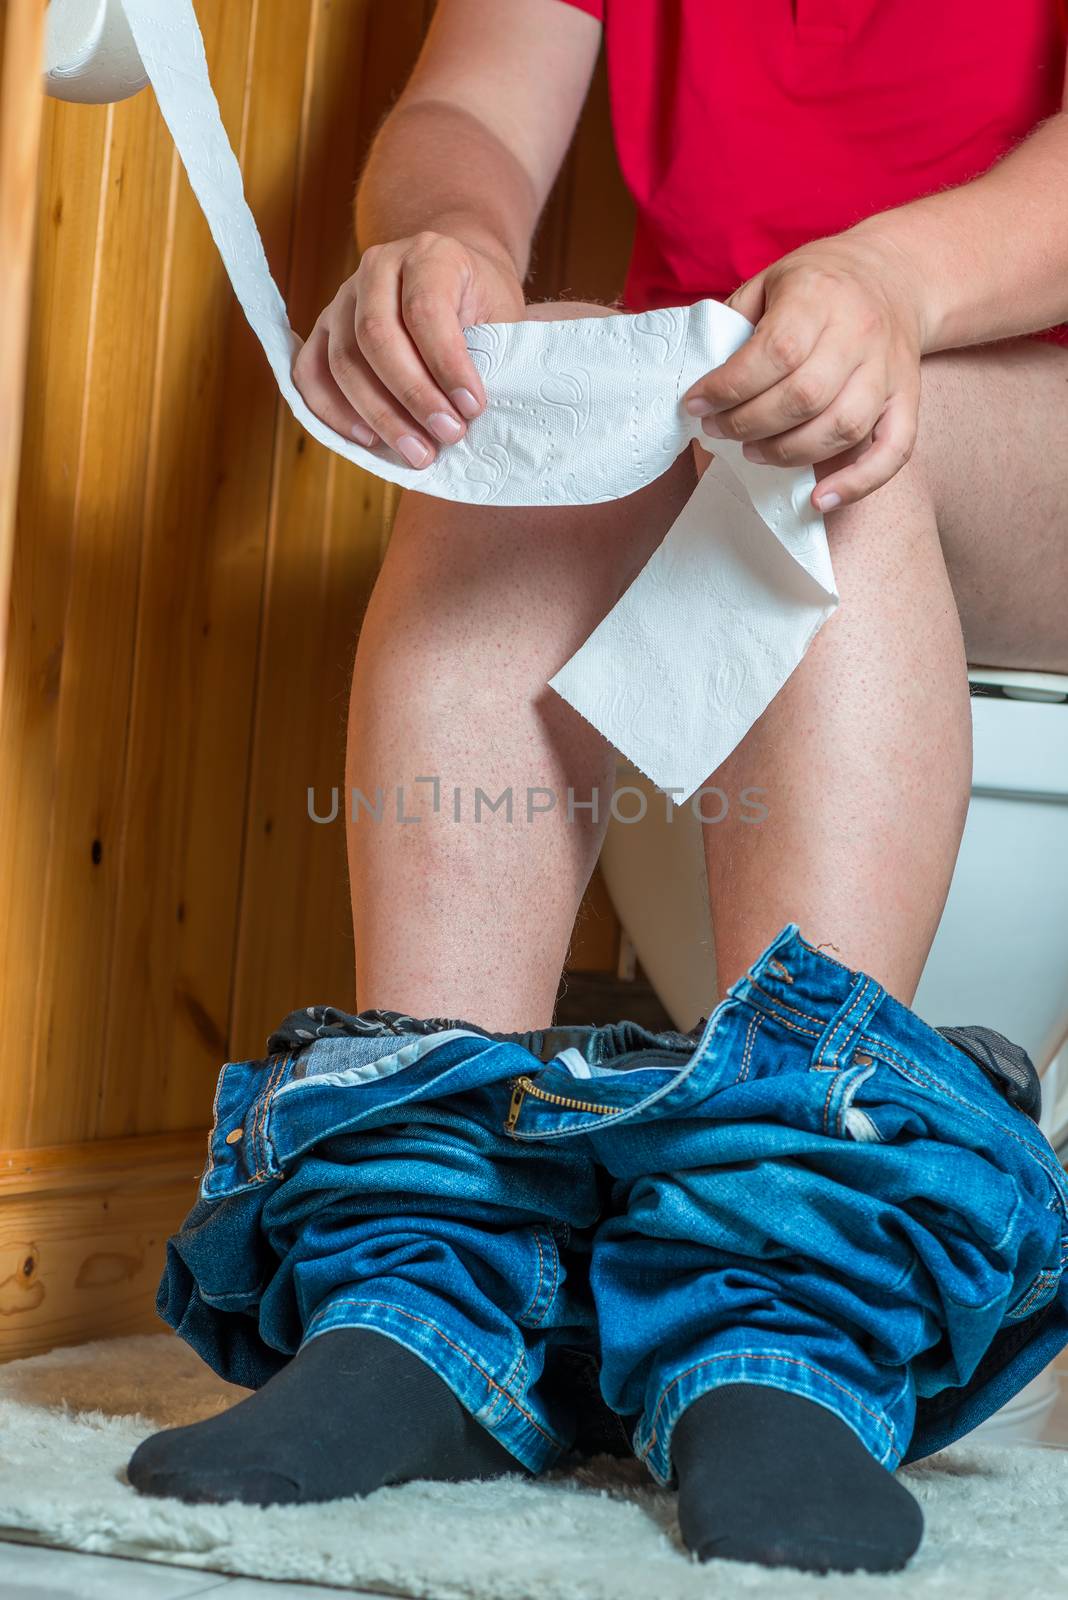 concept photo - a man in a toilet tears off toilet paper